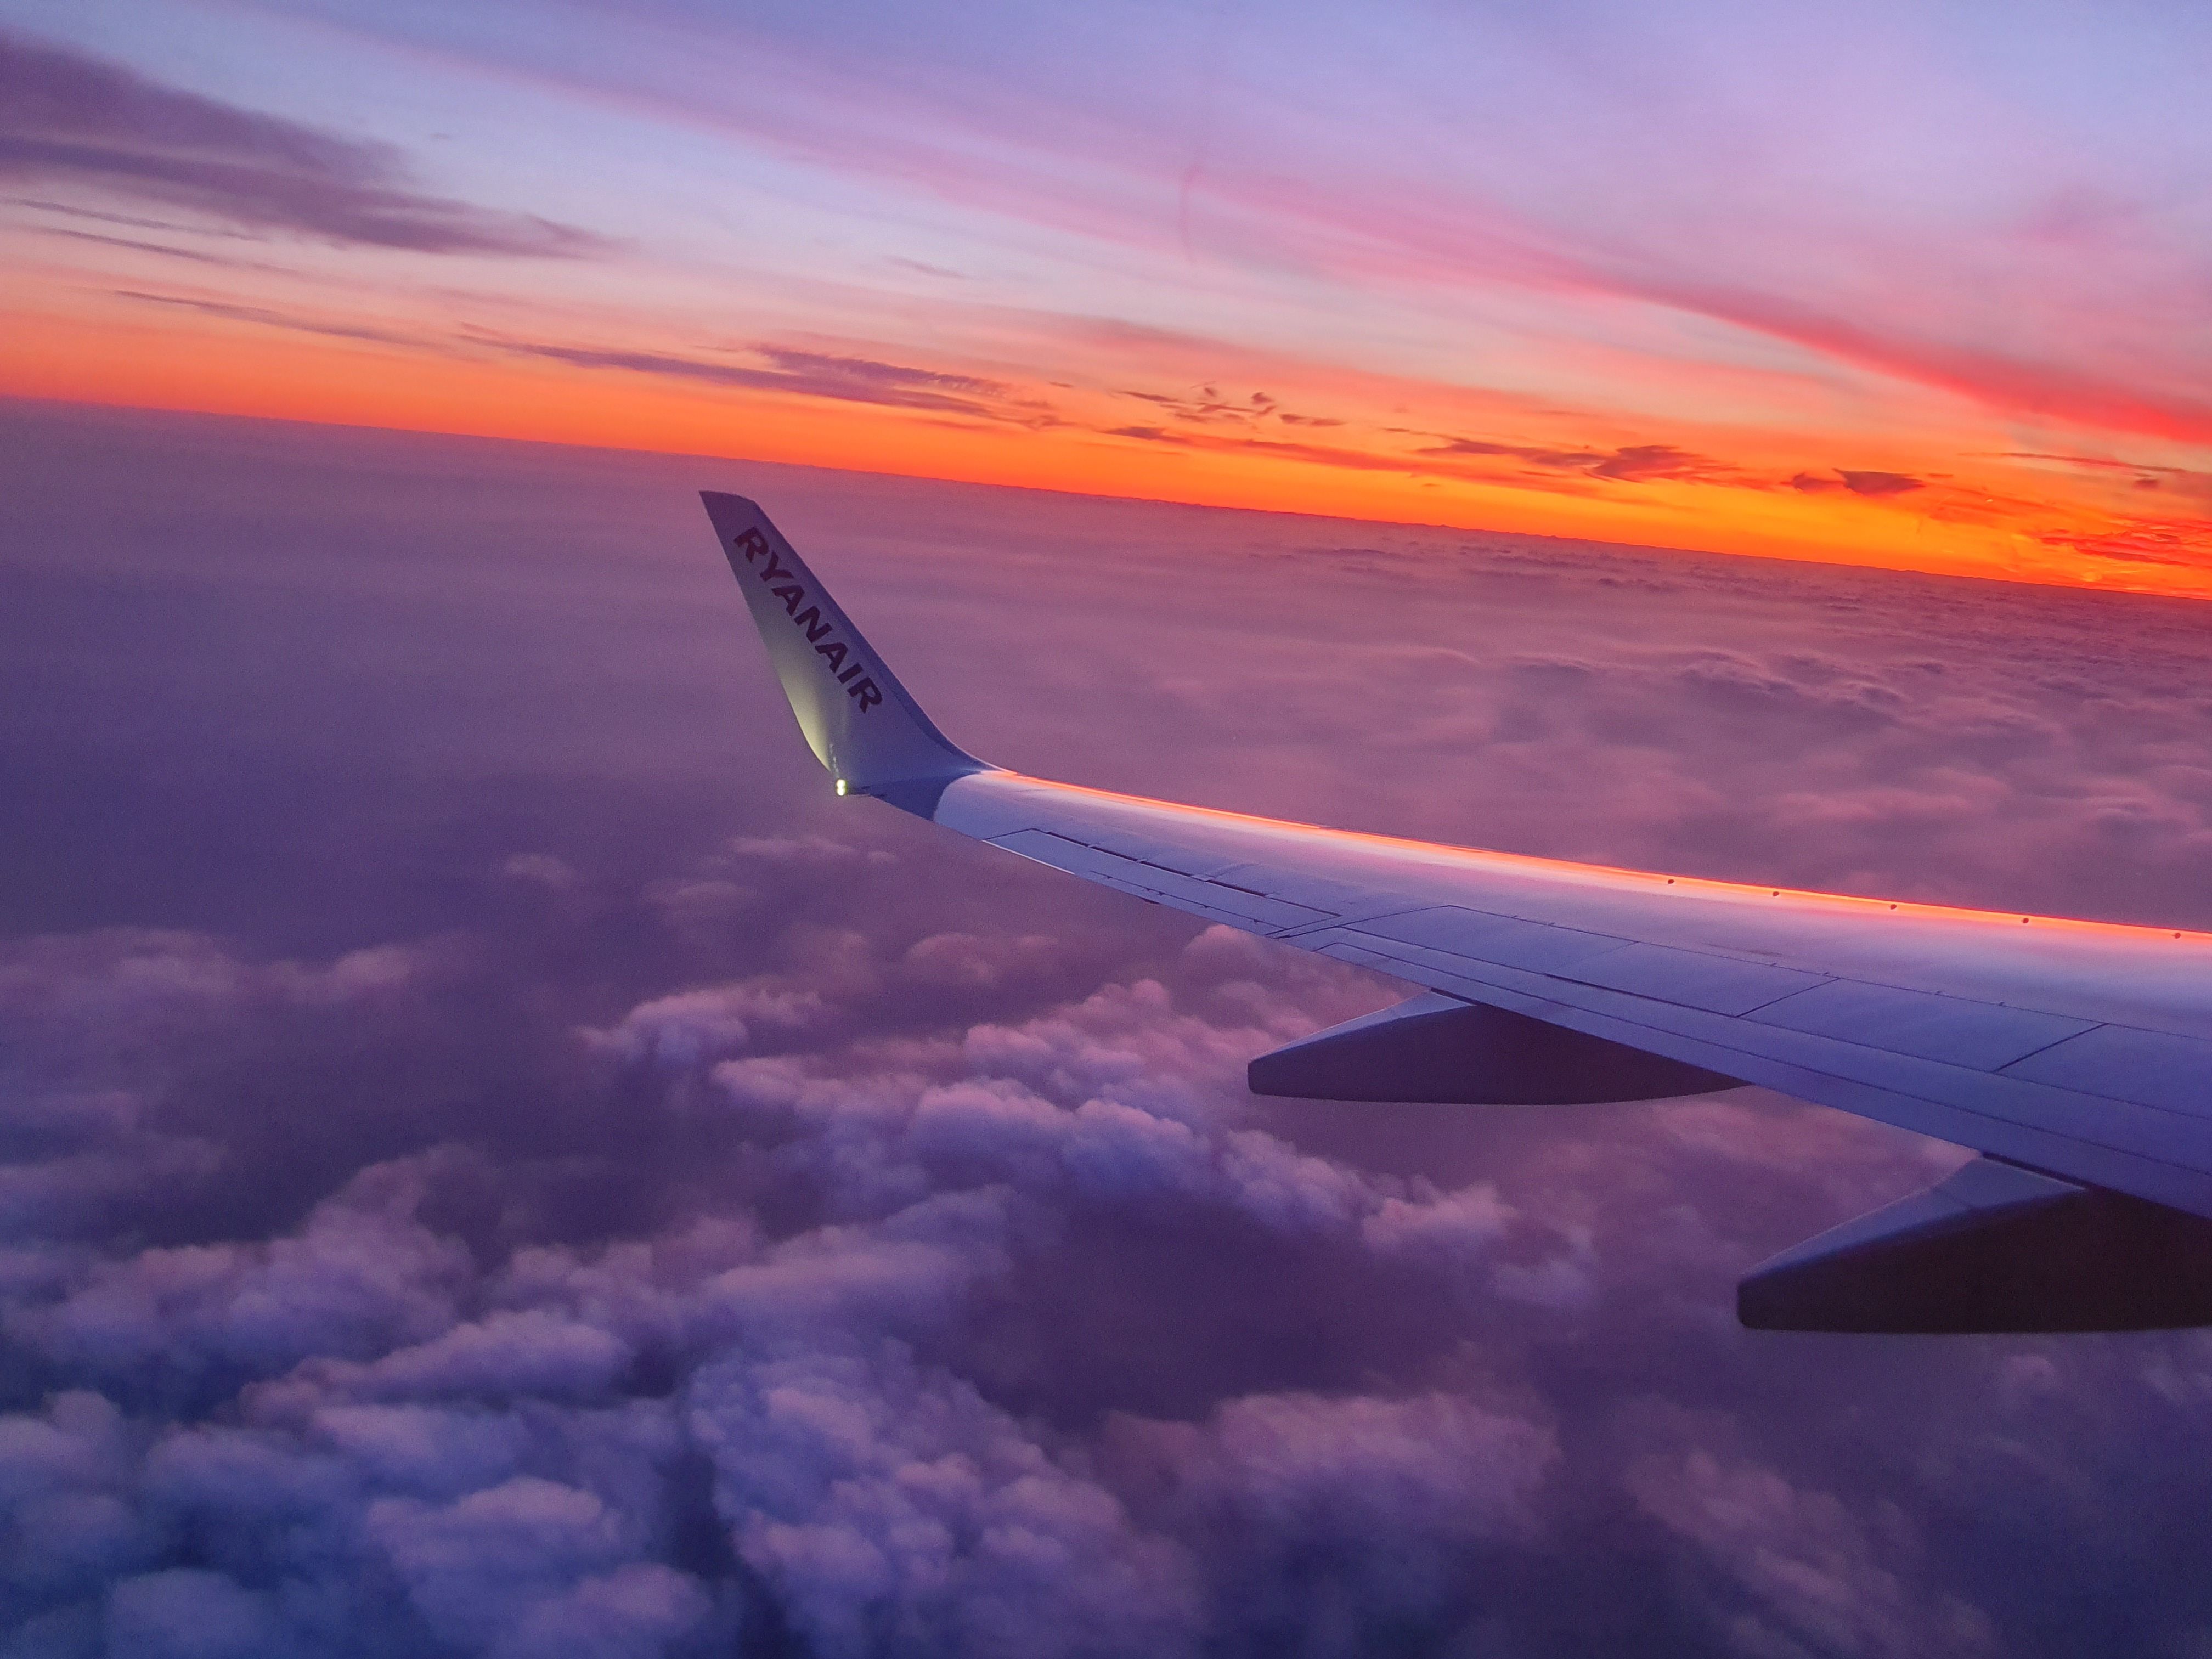 A beautiful picture of a sunrise taken from a window seat on a Ryanair 737-800